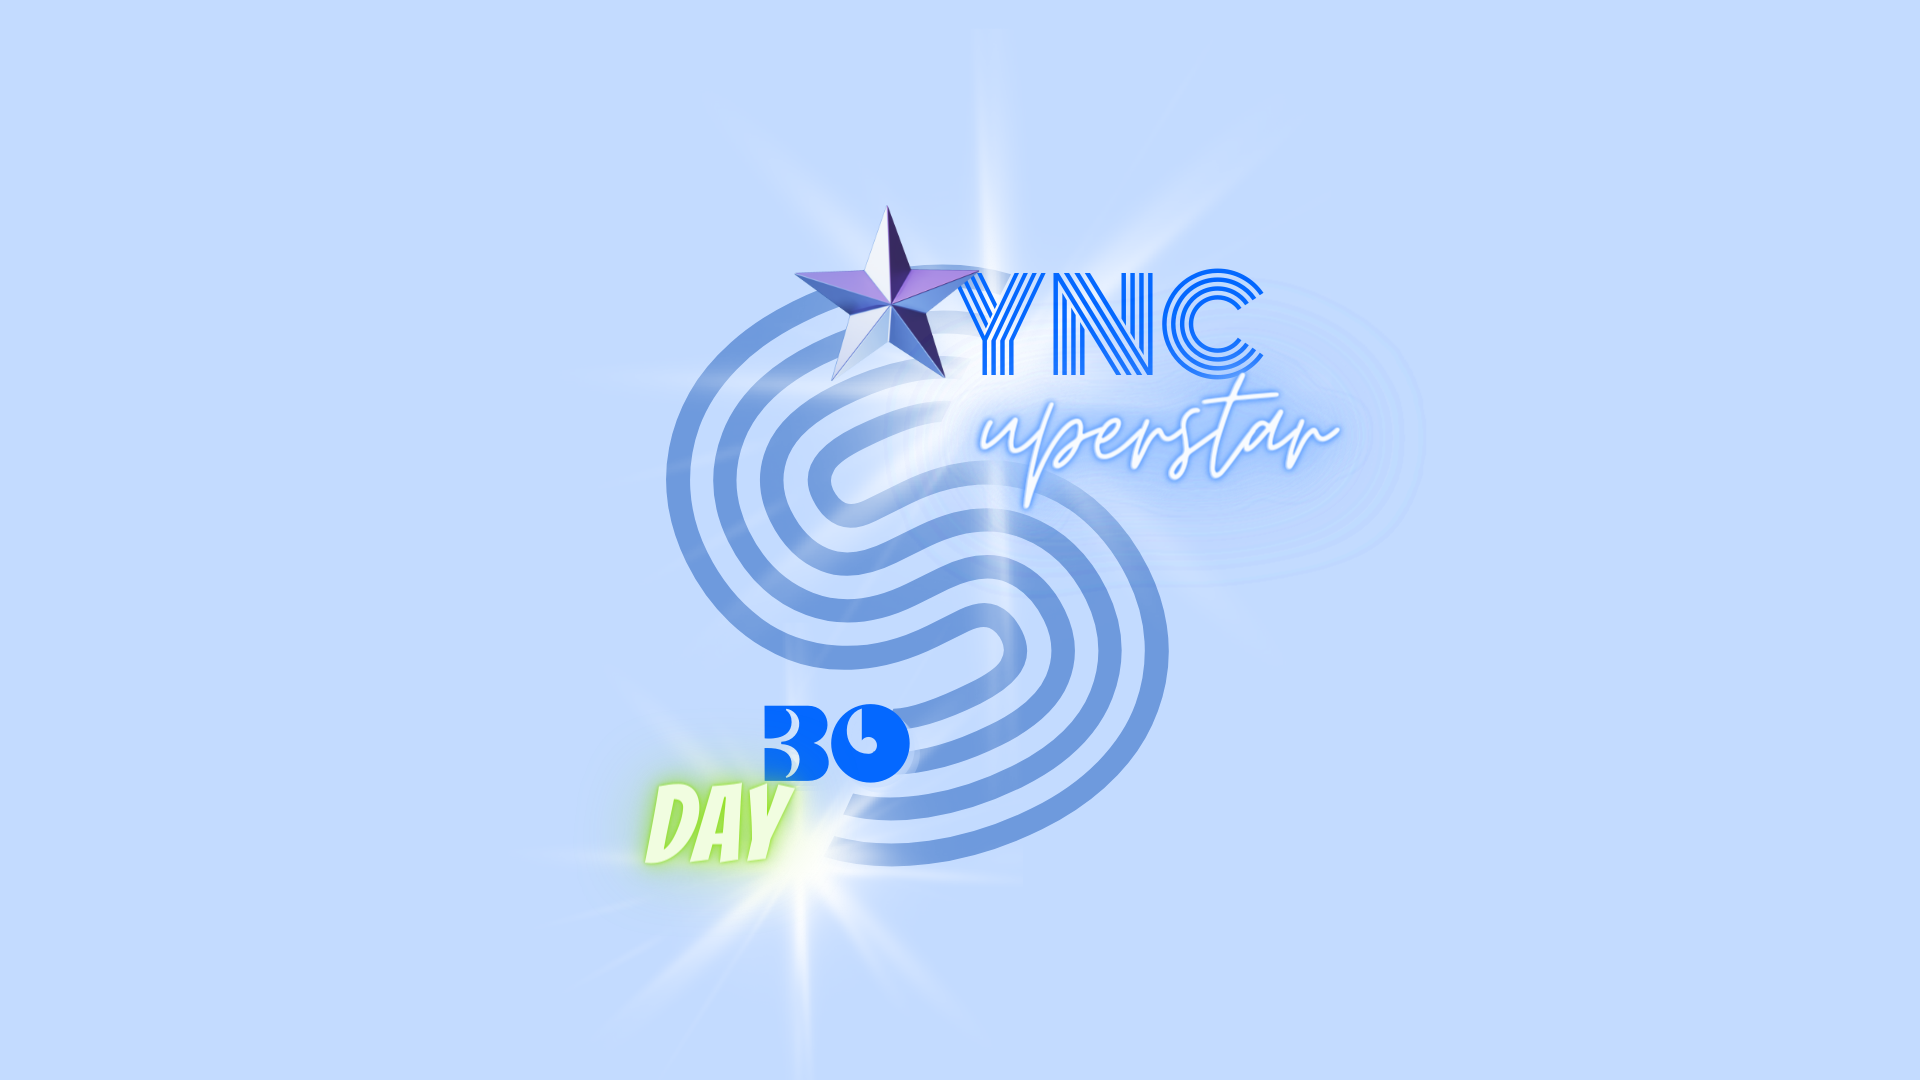 Sync Superstar - online music licensing course